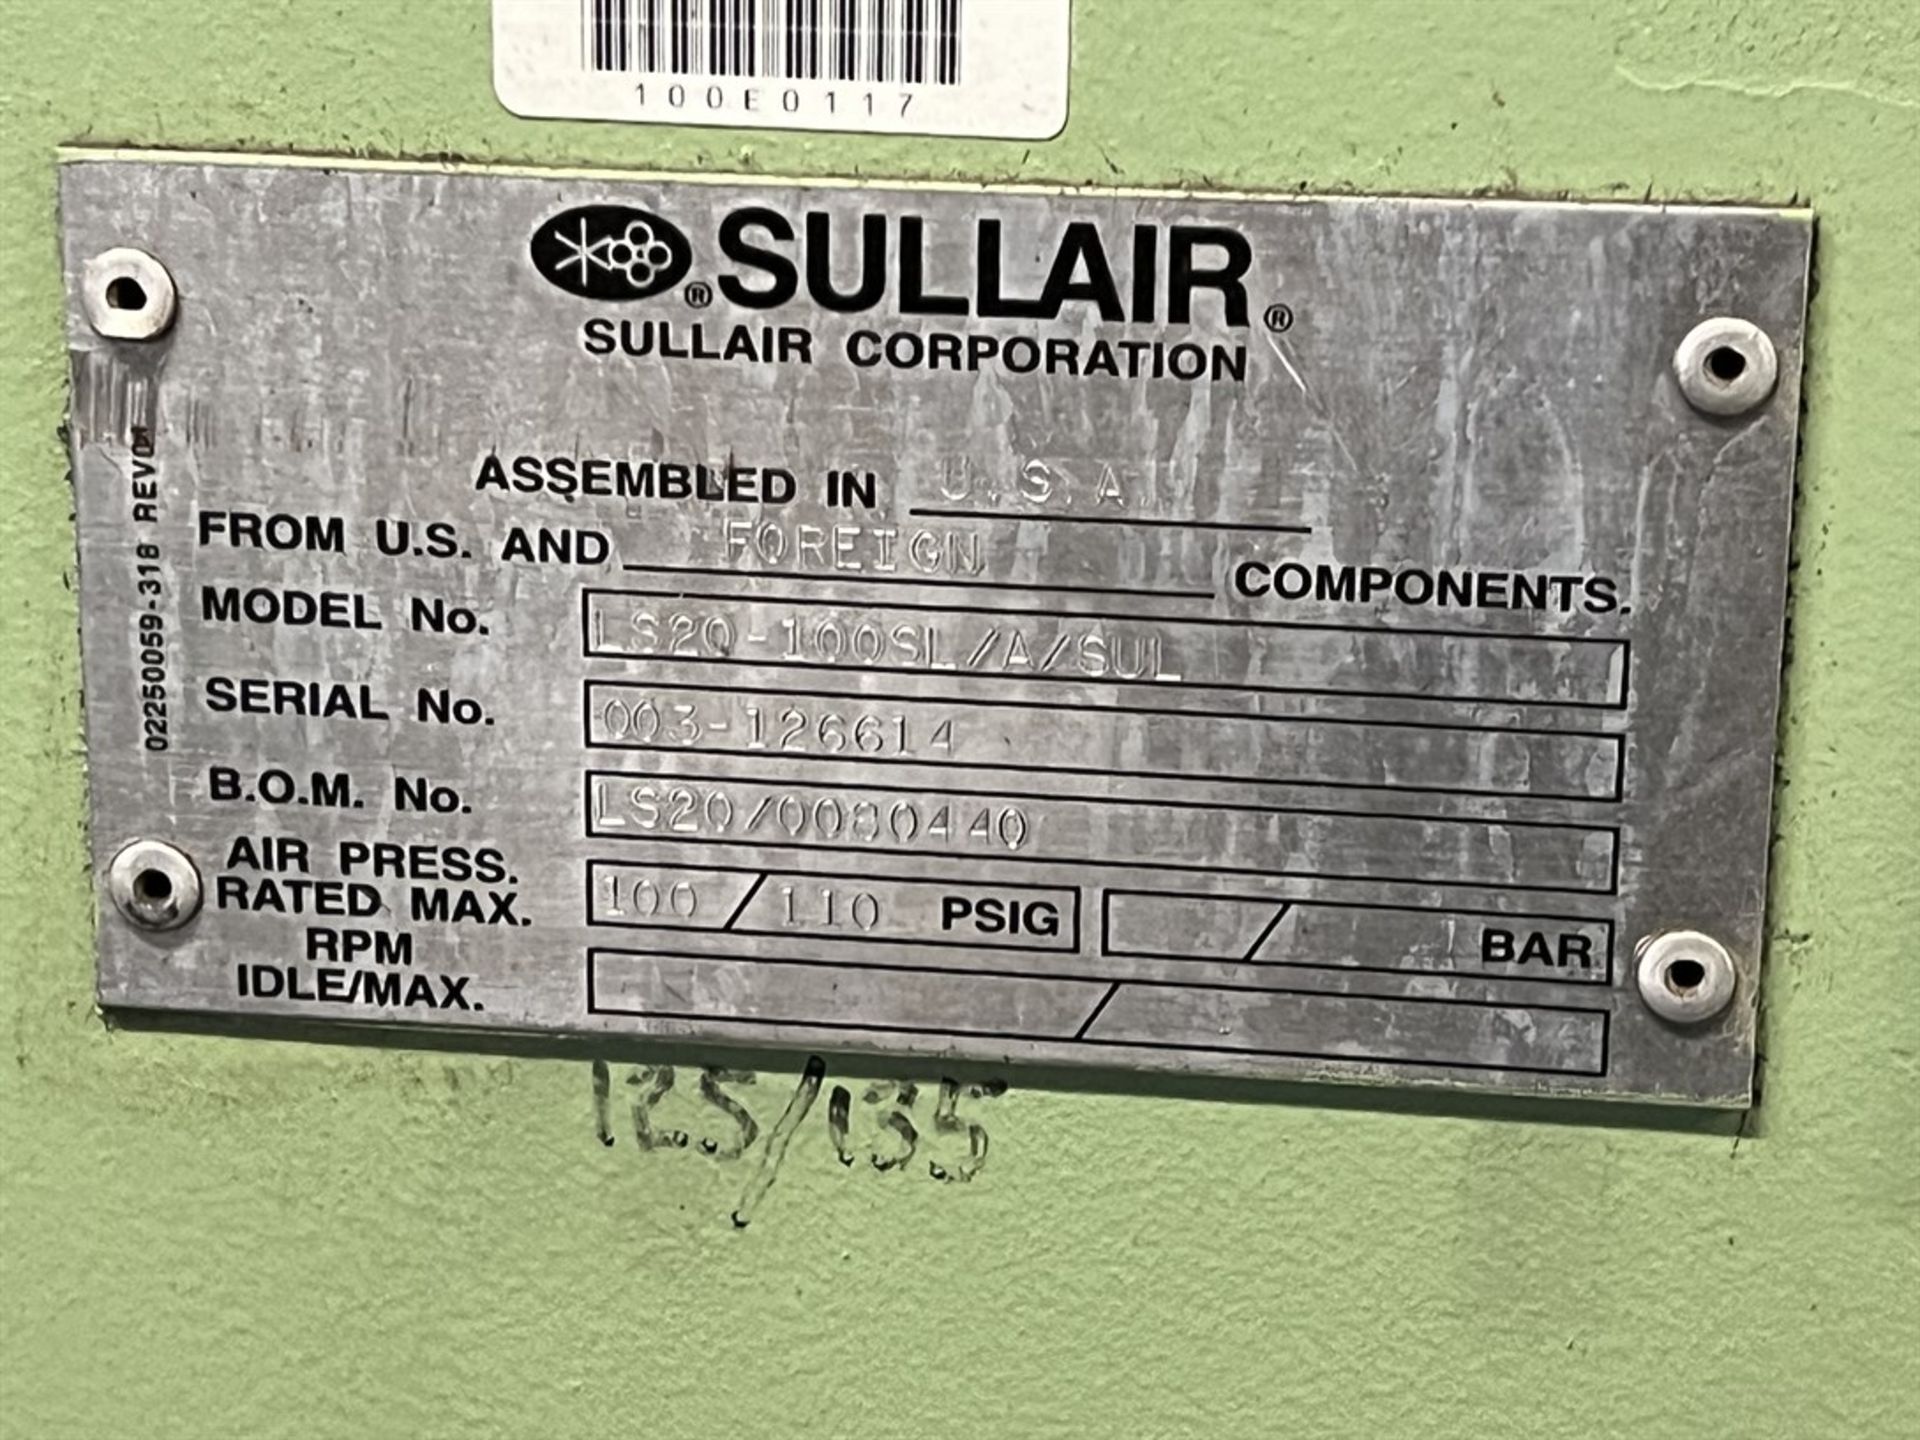 SULLAIR LS20- 100 SL/A/SUL 100 HP Air Compressor, s/n 003-126614, 100/110 PSIG - Image 6 of 6